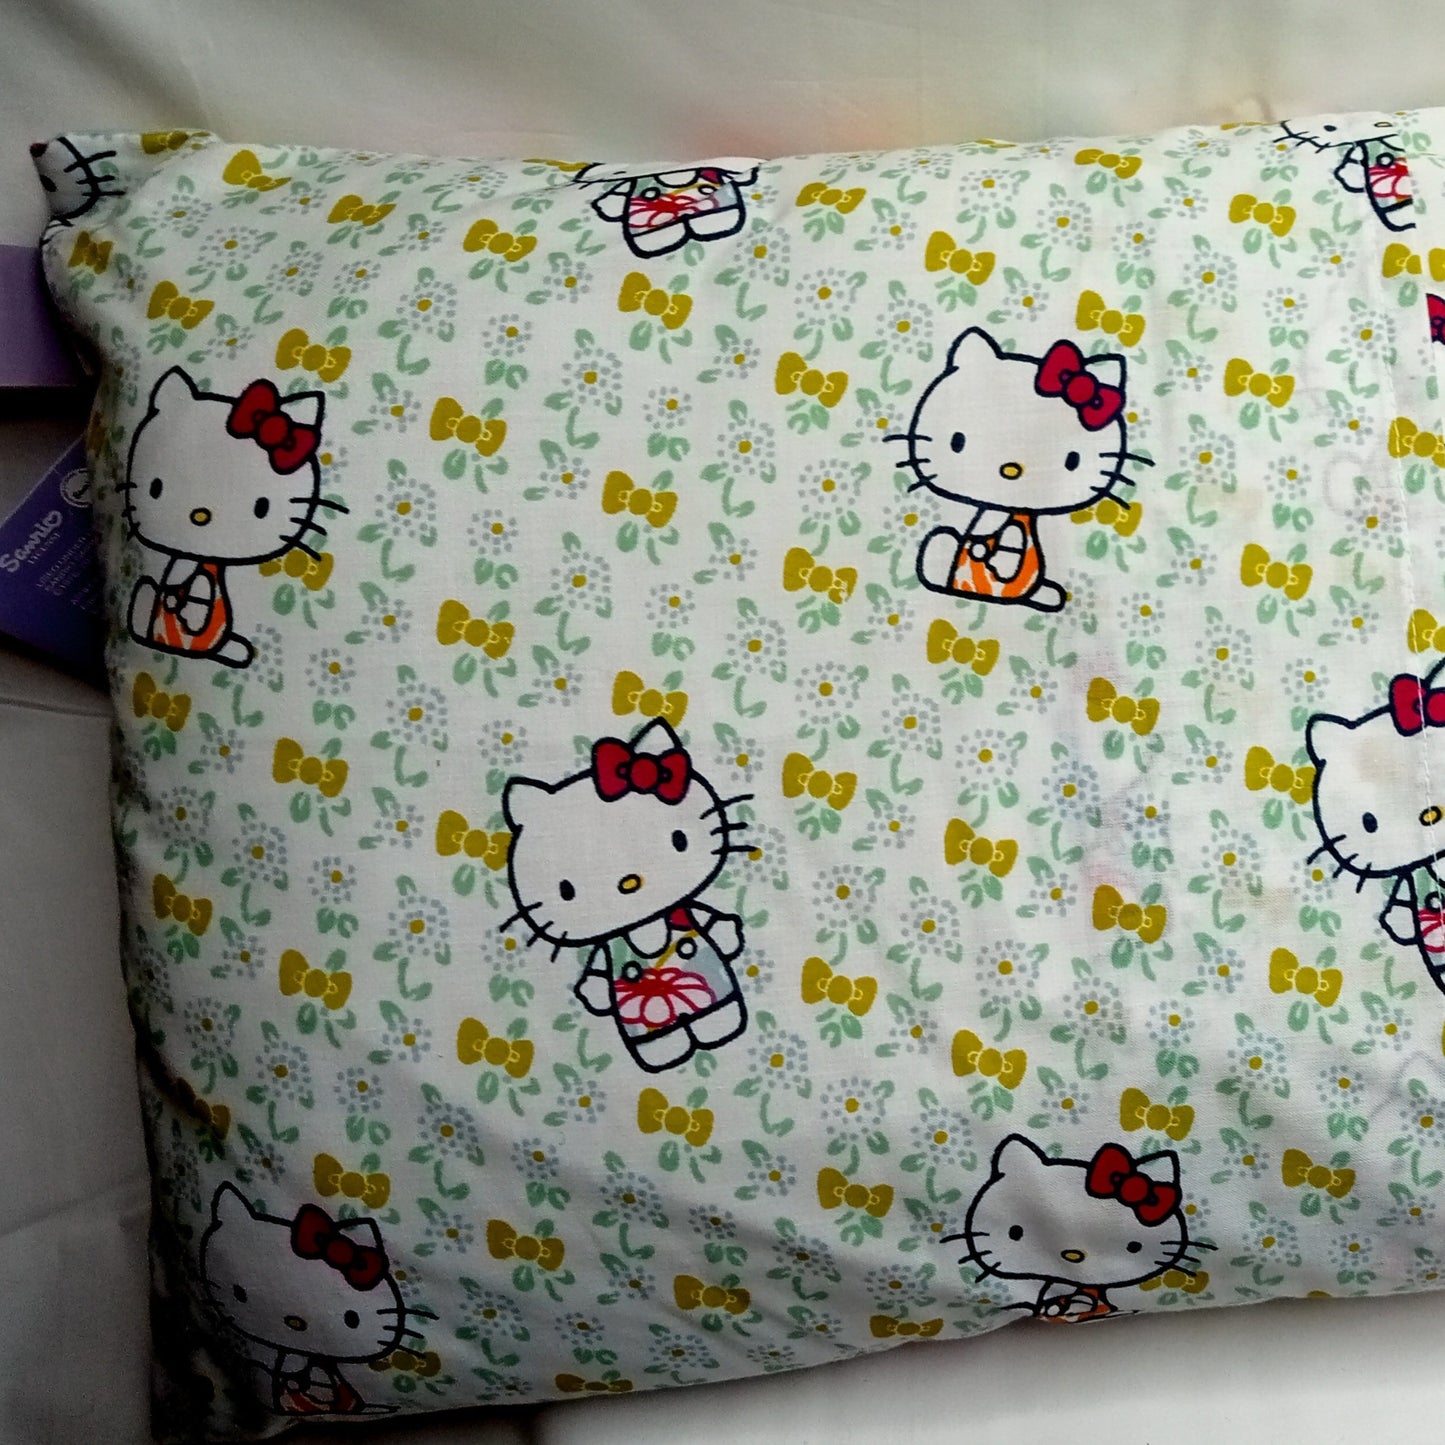 Park Life Filled Cushion by Hello Kitty Liberty Art Fabric